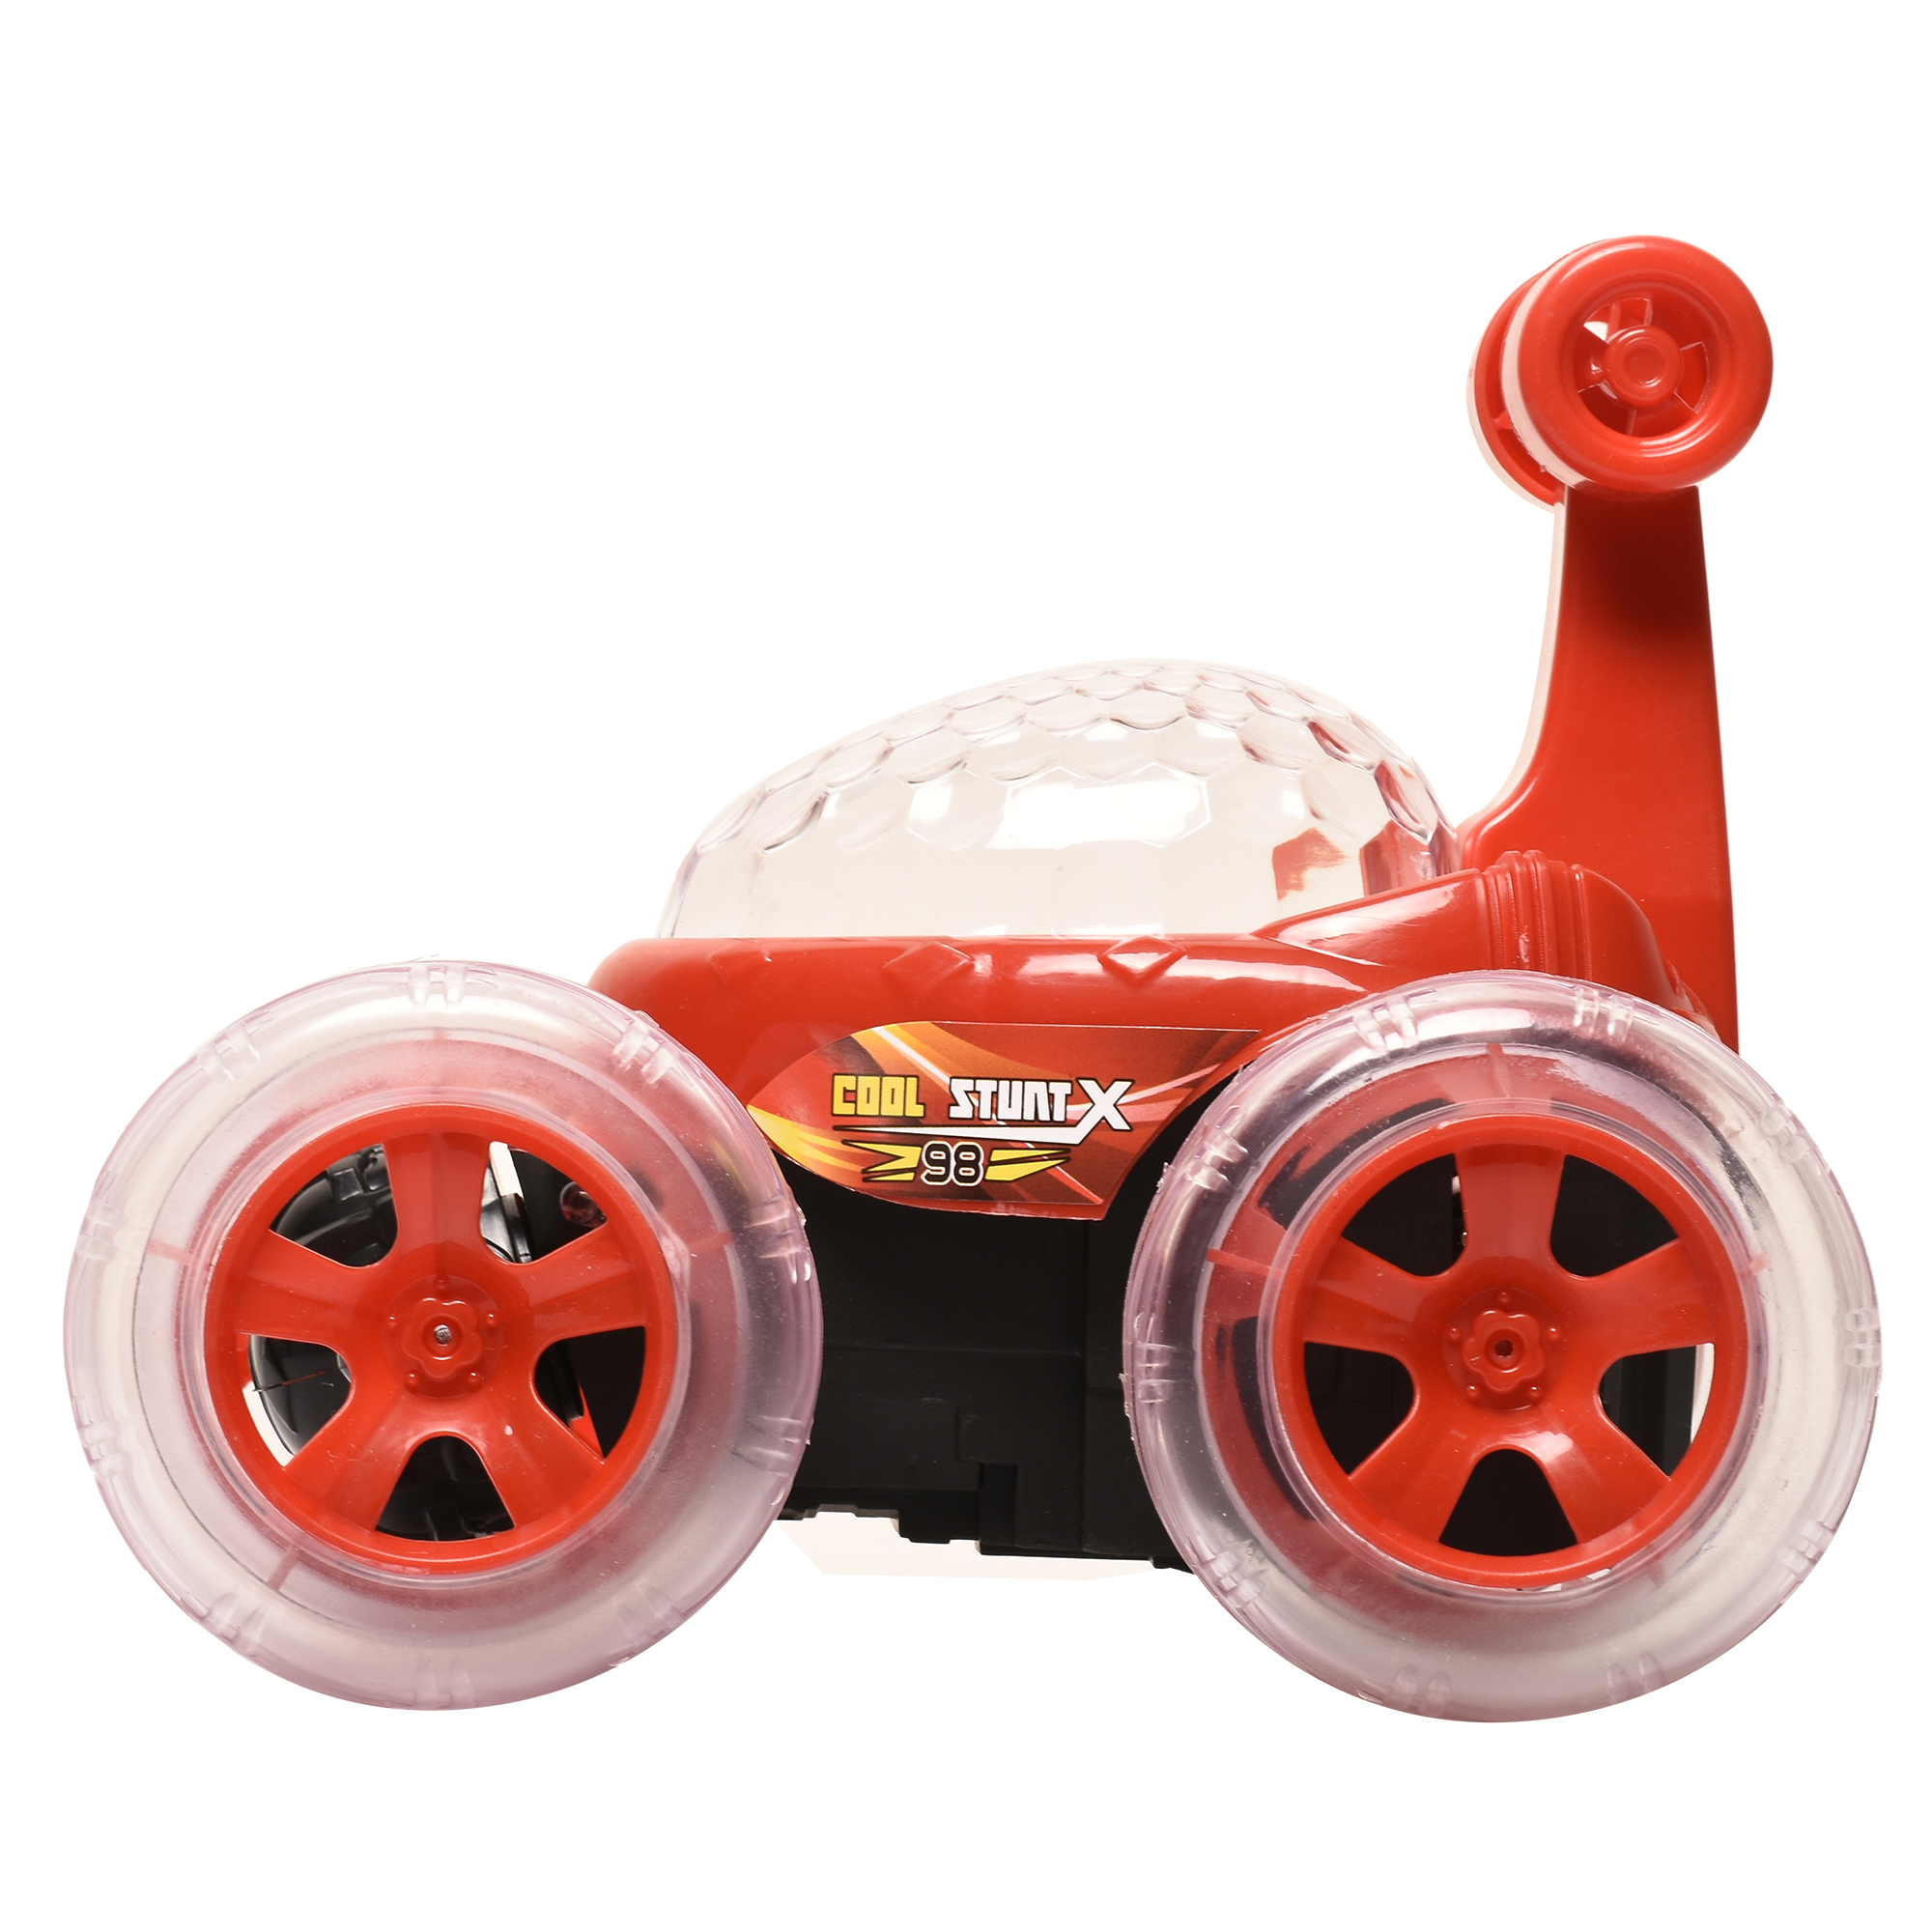 Rechargeable Remote Control Stunt Tipper RC Car Acrobatic 360 Degree Spiral Spin Twisting Stunt Car with Colorful Lights & Music Toys for Kids 5+Years (Red)